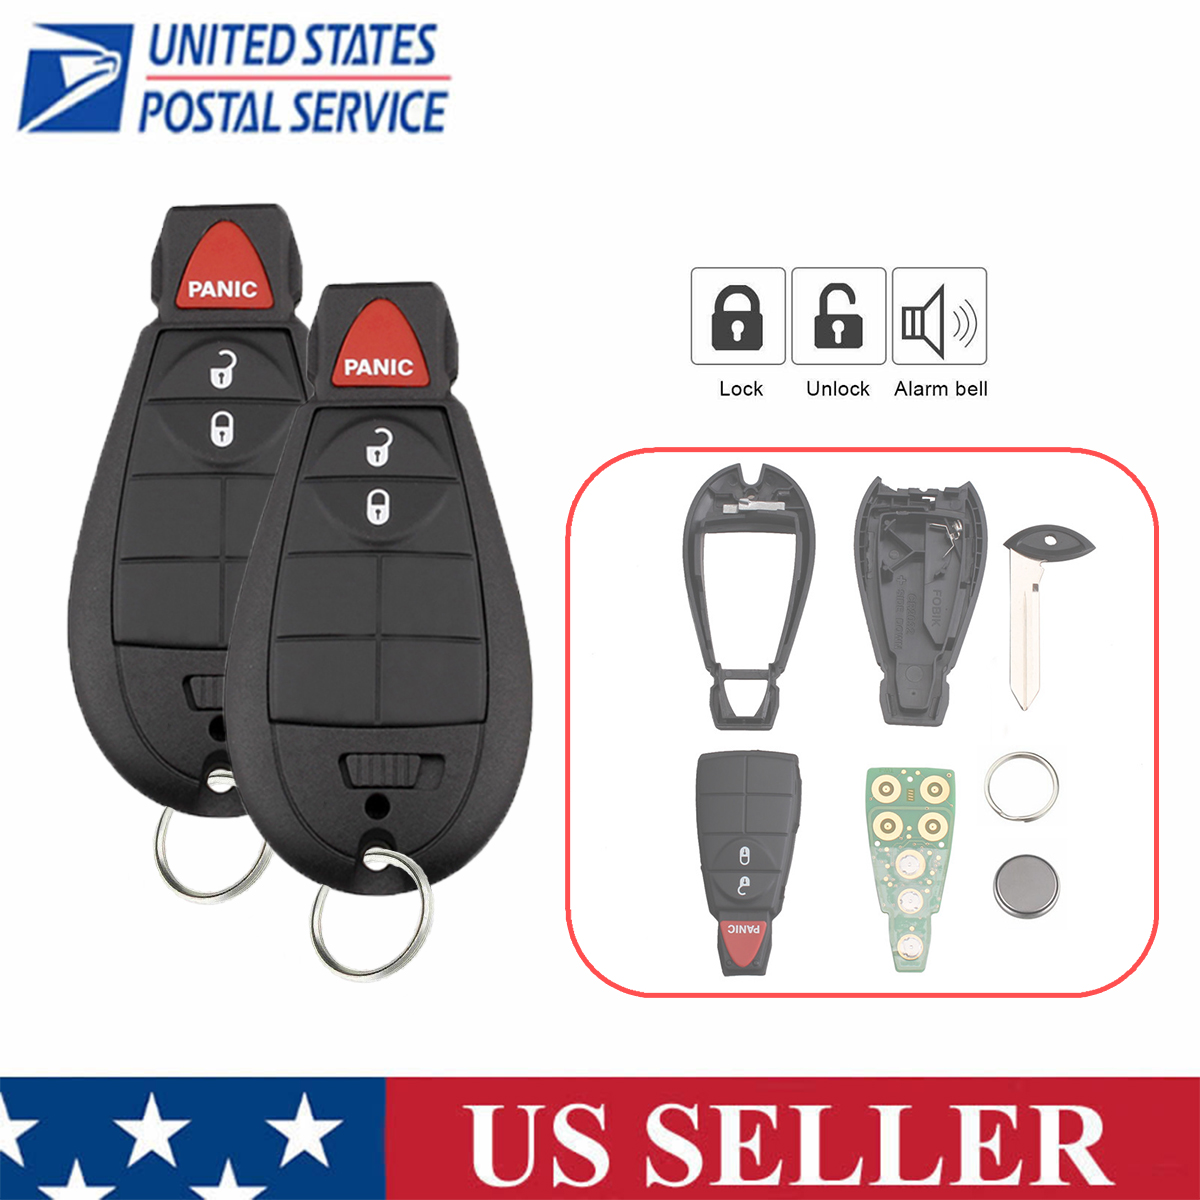 2 Replacement For 06 07 08 09 10 11 12 13 Dodge Durango Keyless Entry Key Fob